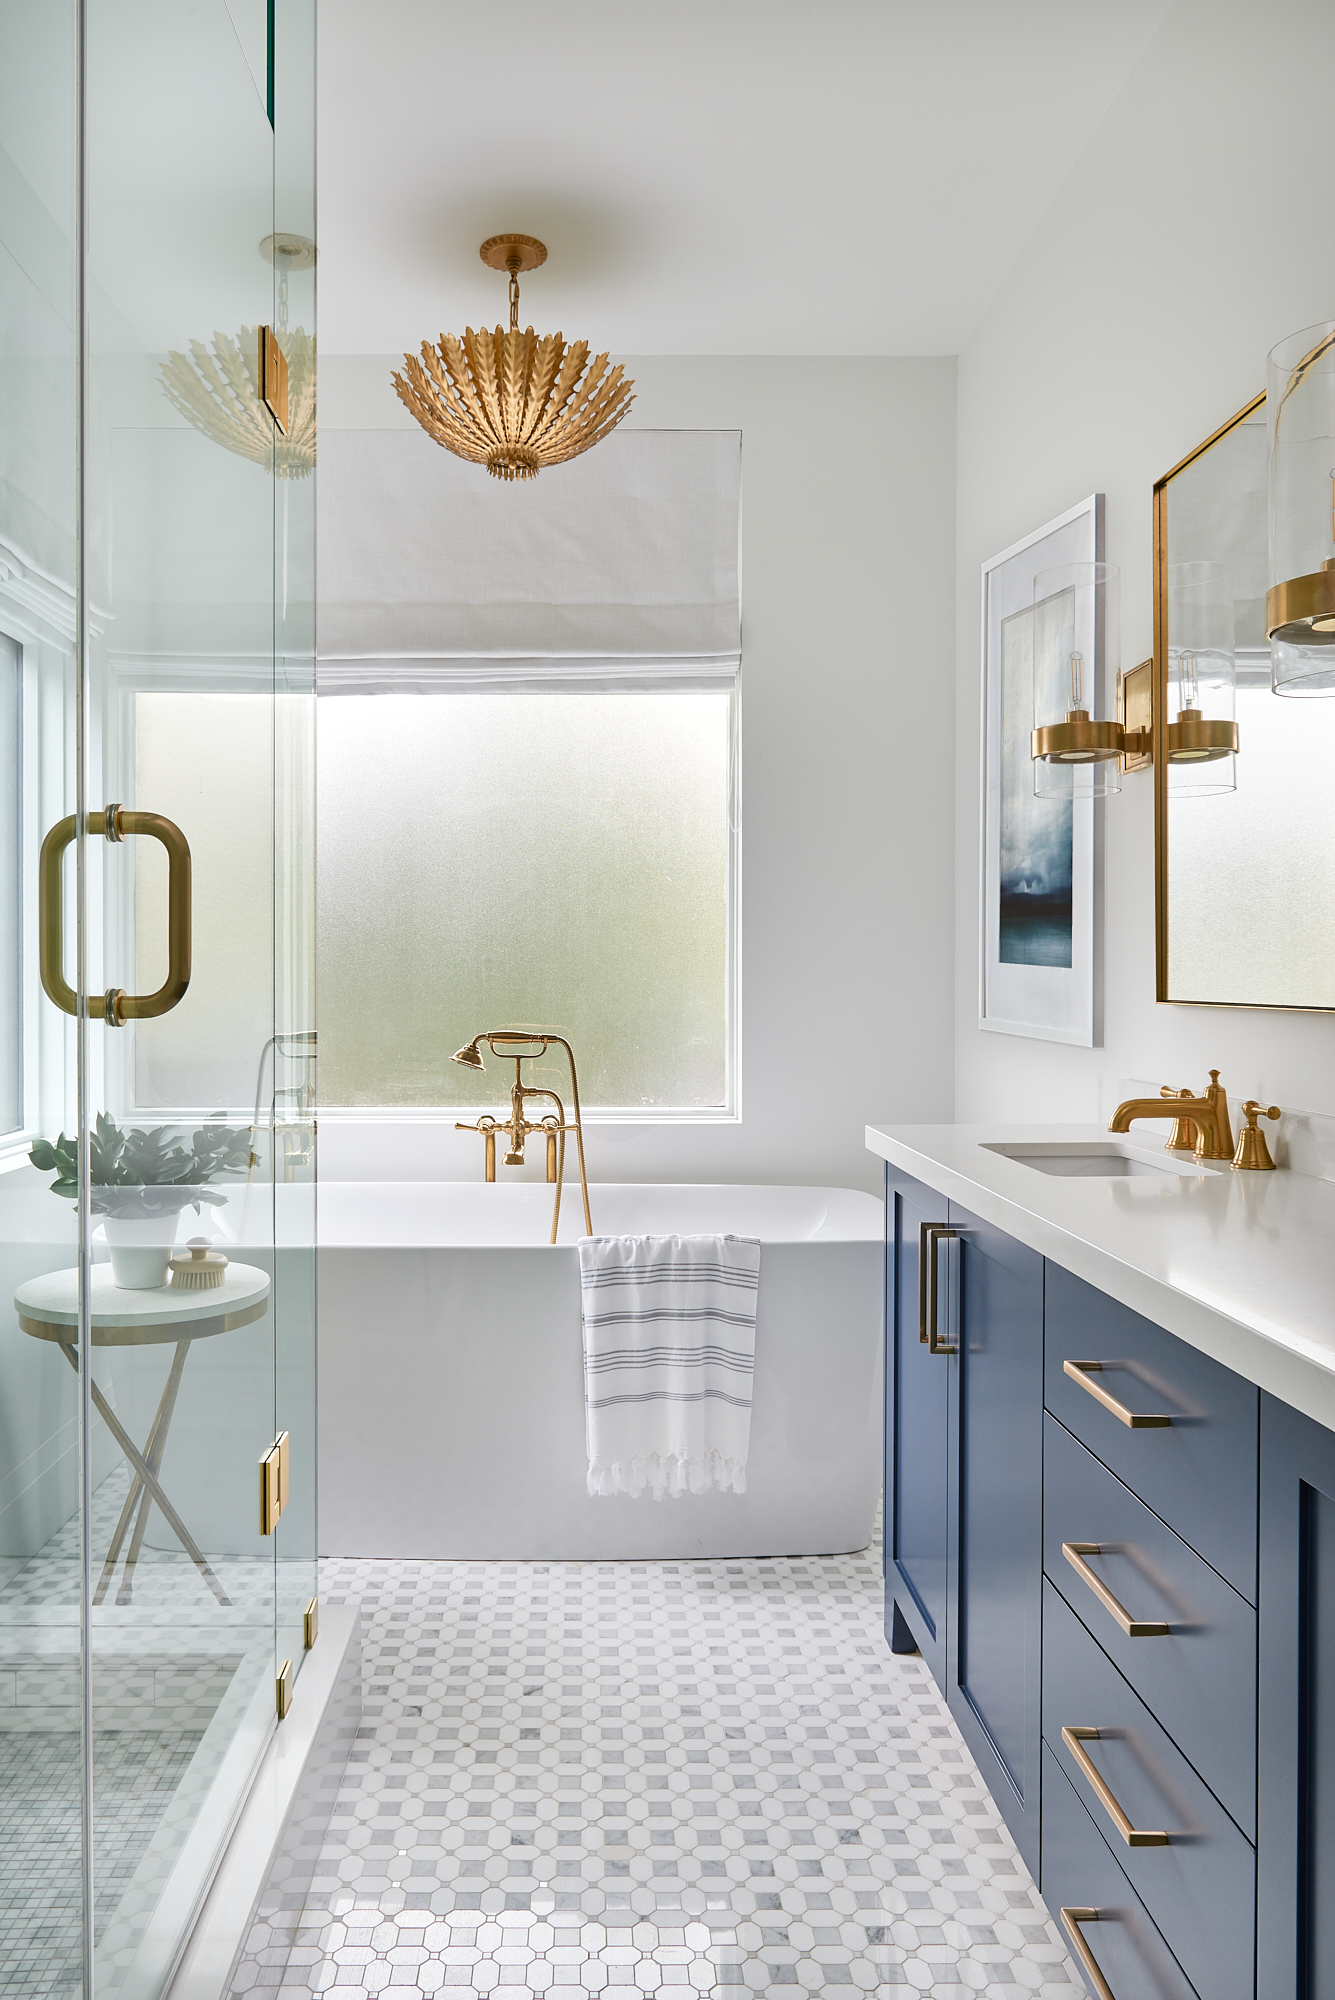 spa-like bathroom with a beautiful free-standing tub, a gold tub faucet, and a decorative light above 